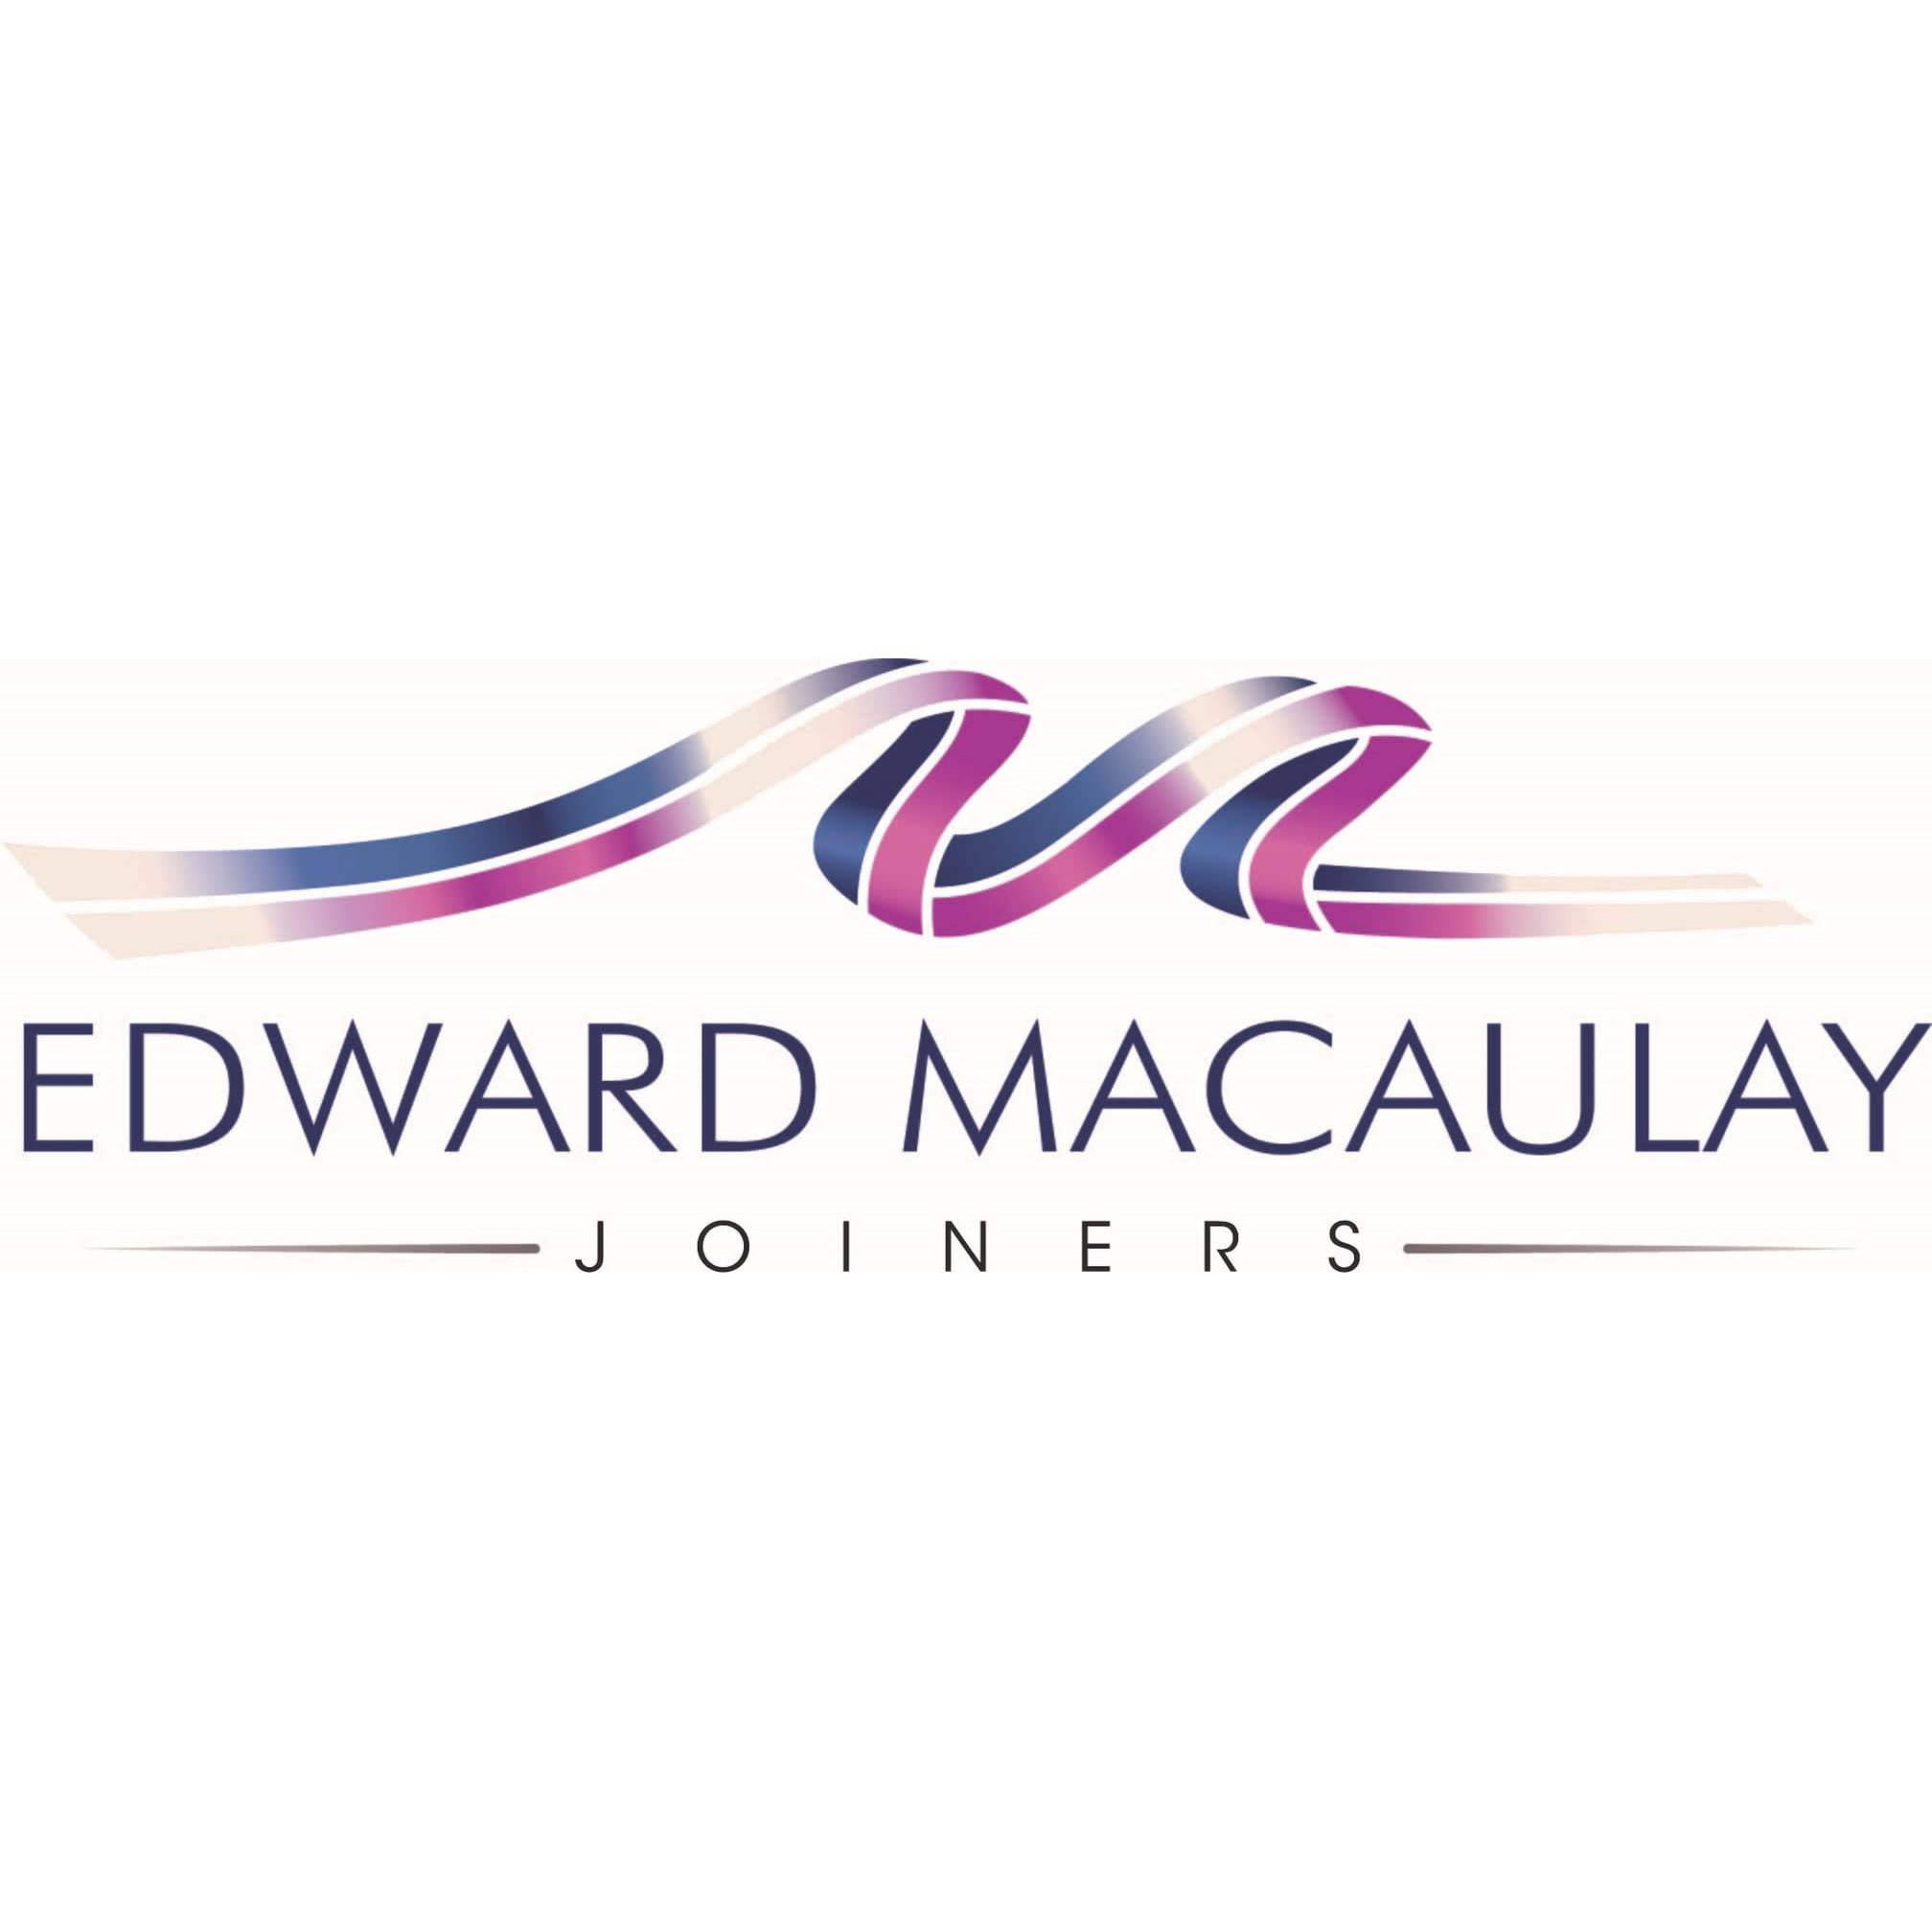 Edward Macaulay Joiners - Falkirk, Stirlingshire FK2 0EX - 01324 720144 | ShowMeLocal.com